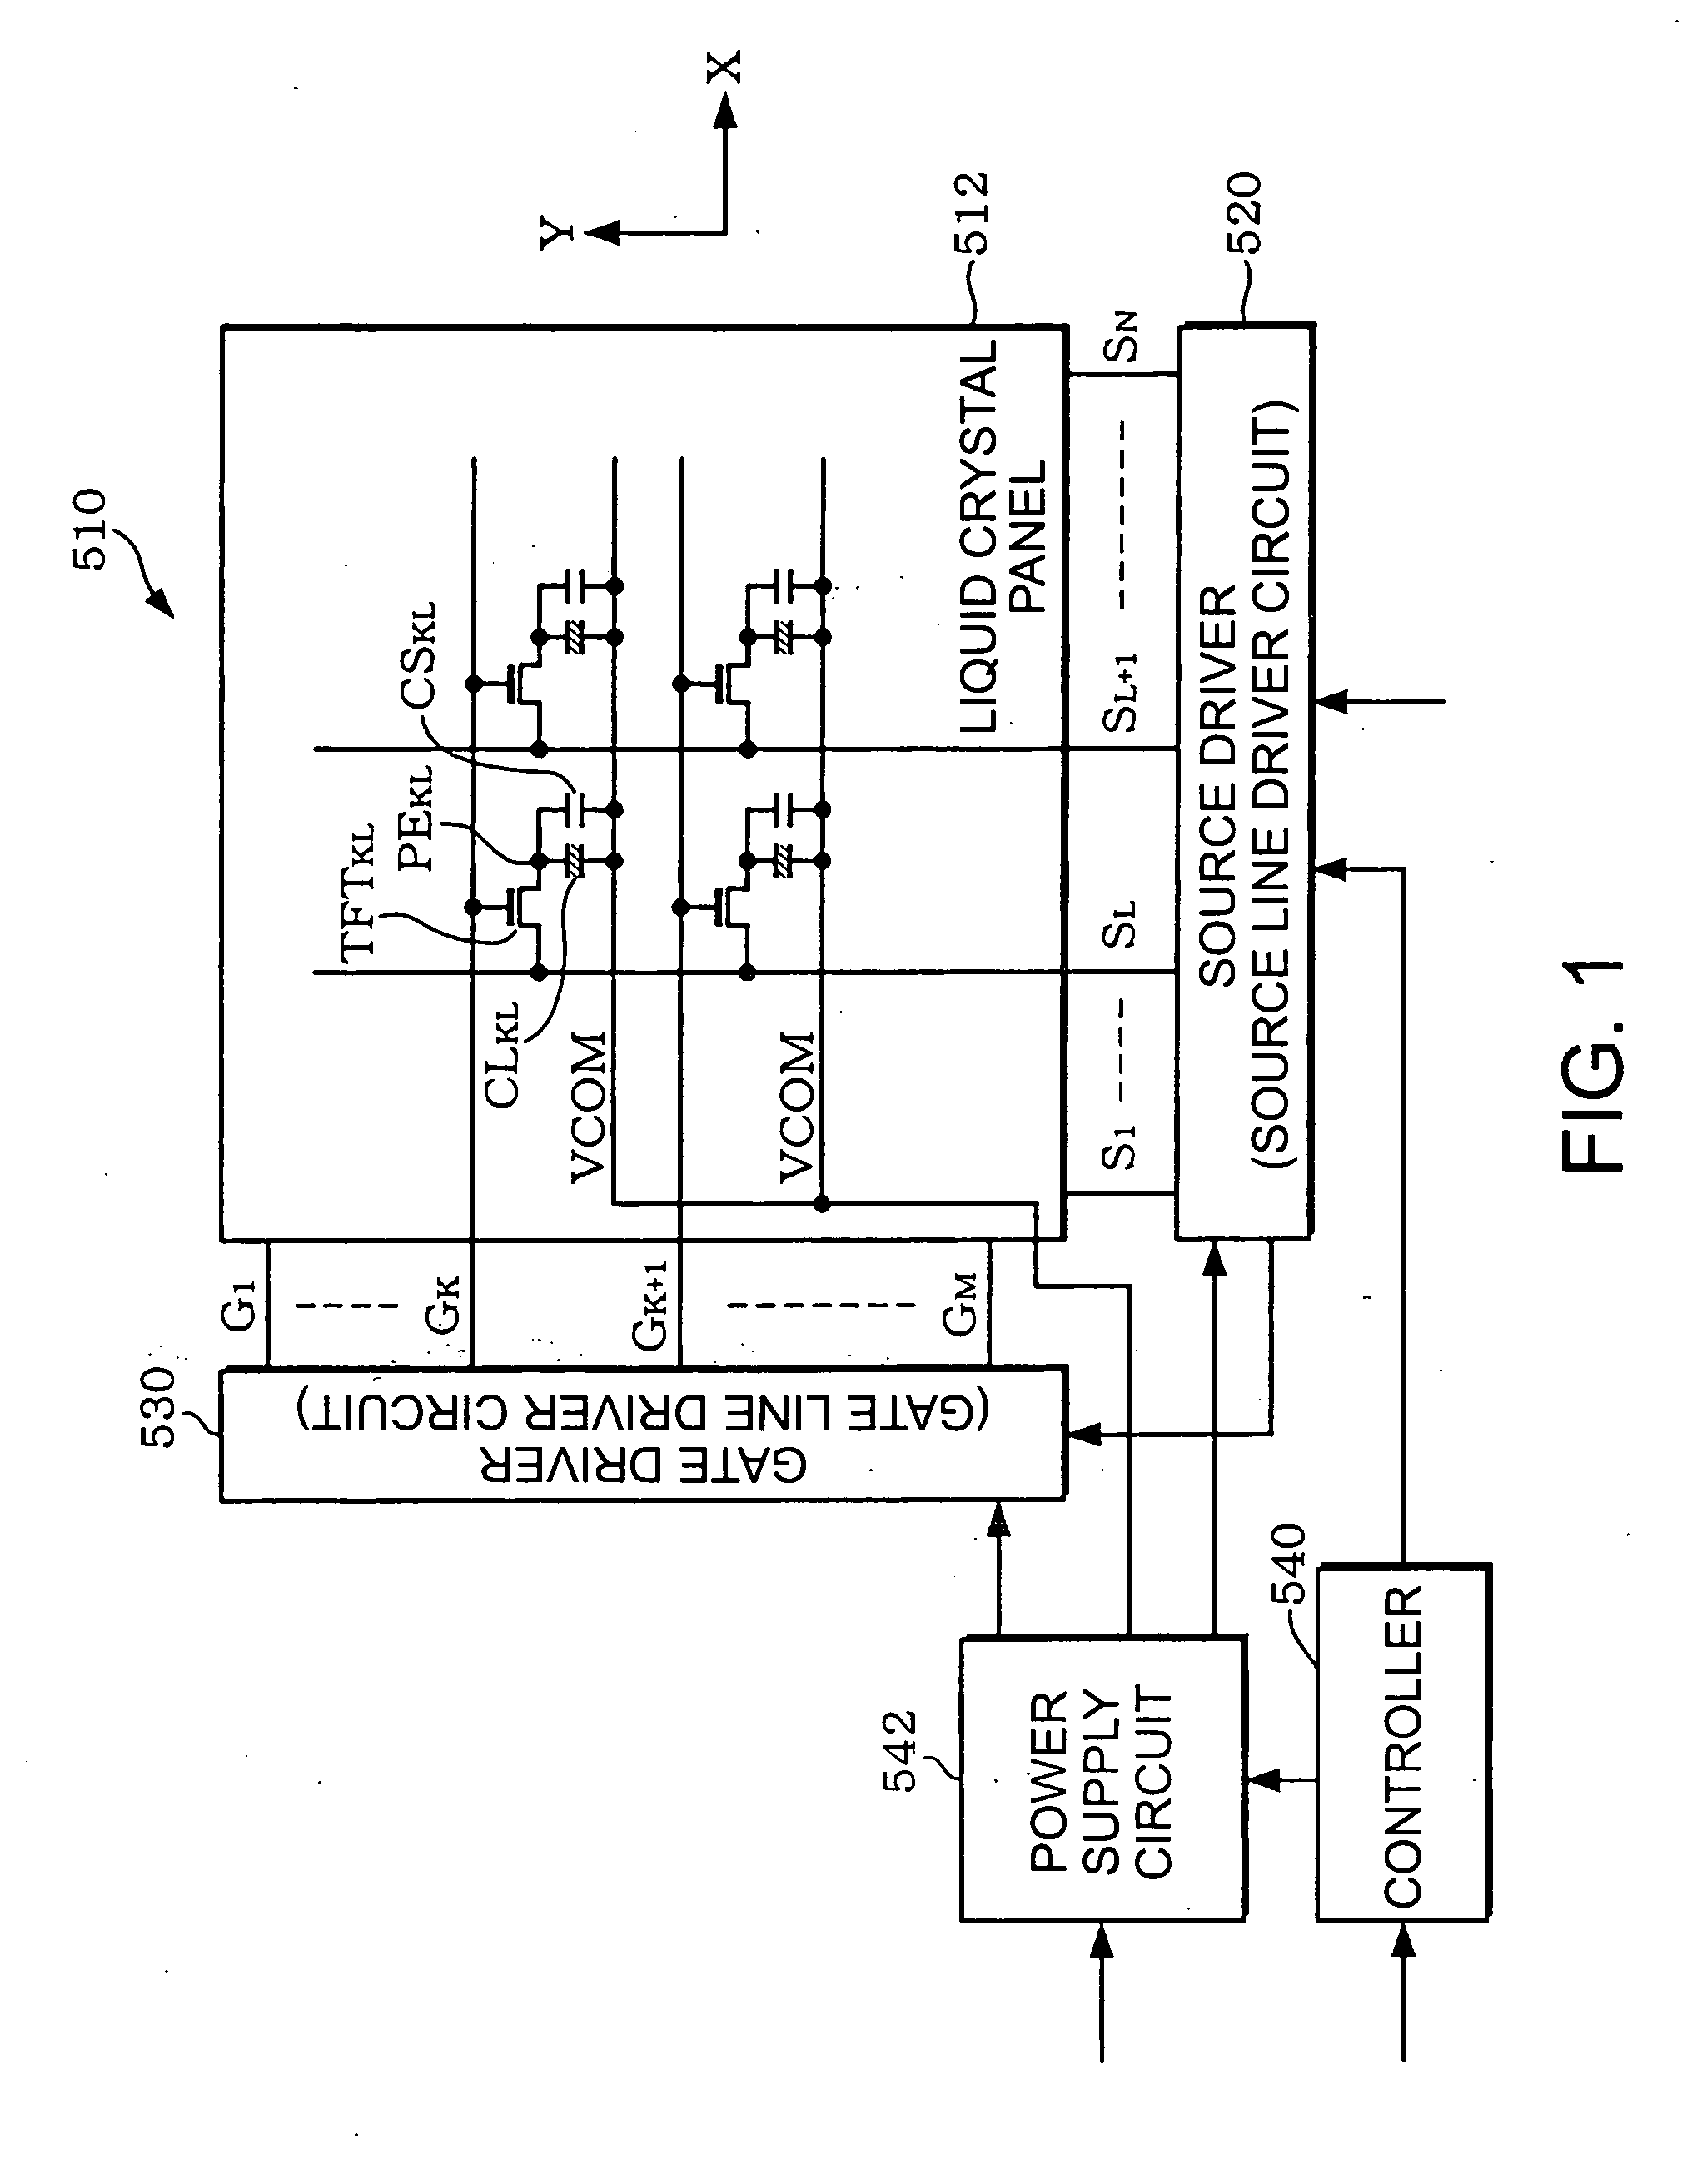 Source driver, electro-optic device, and driving method